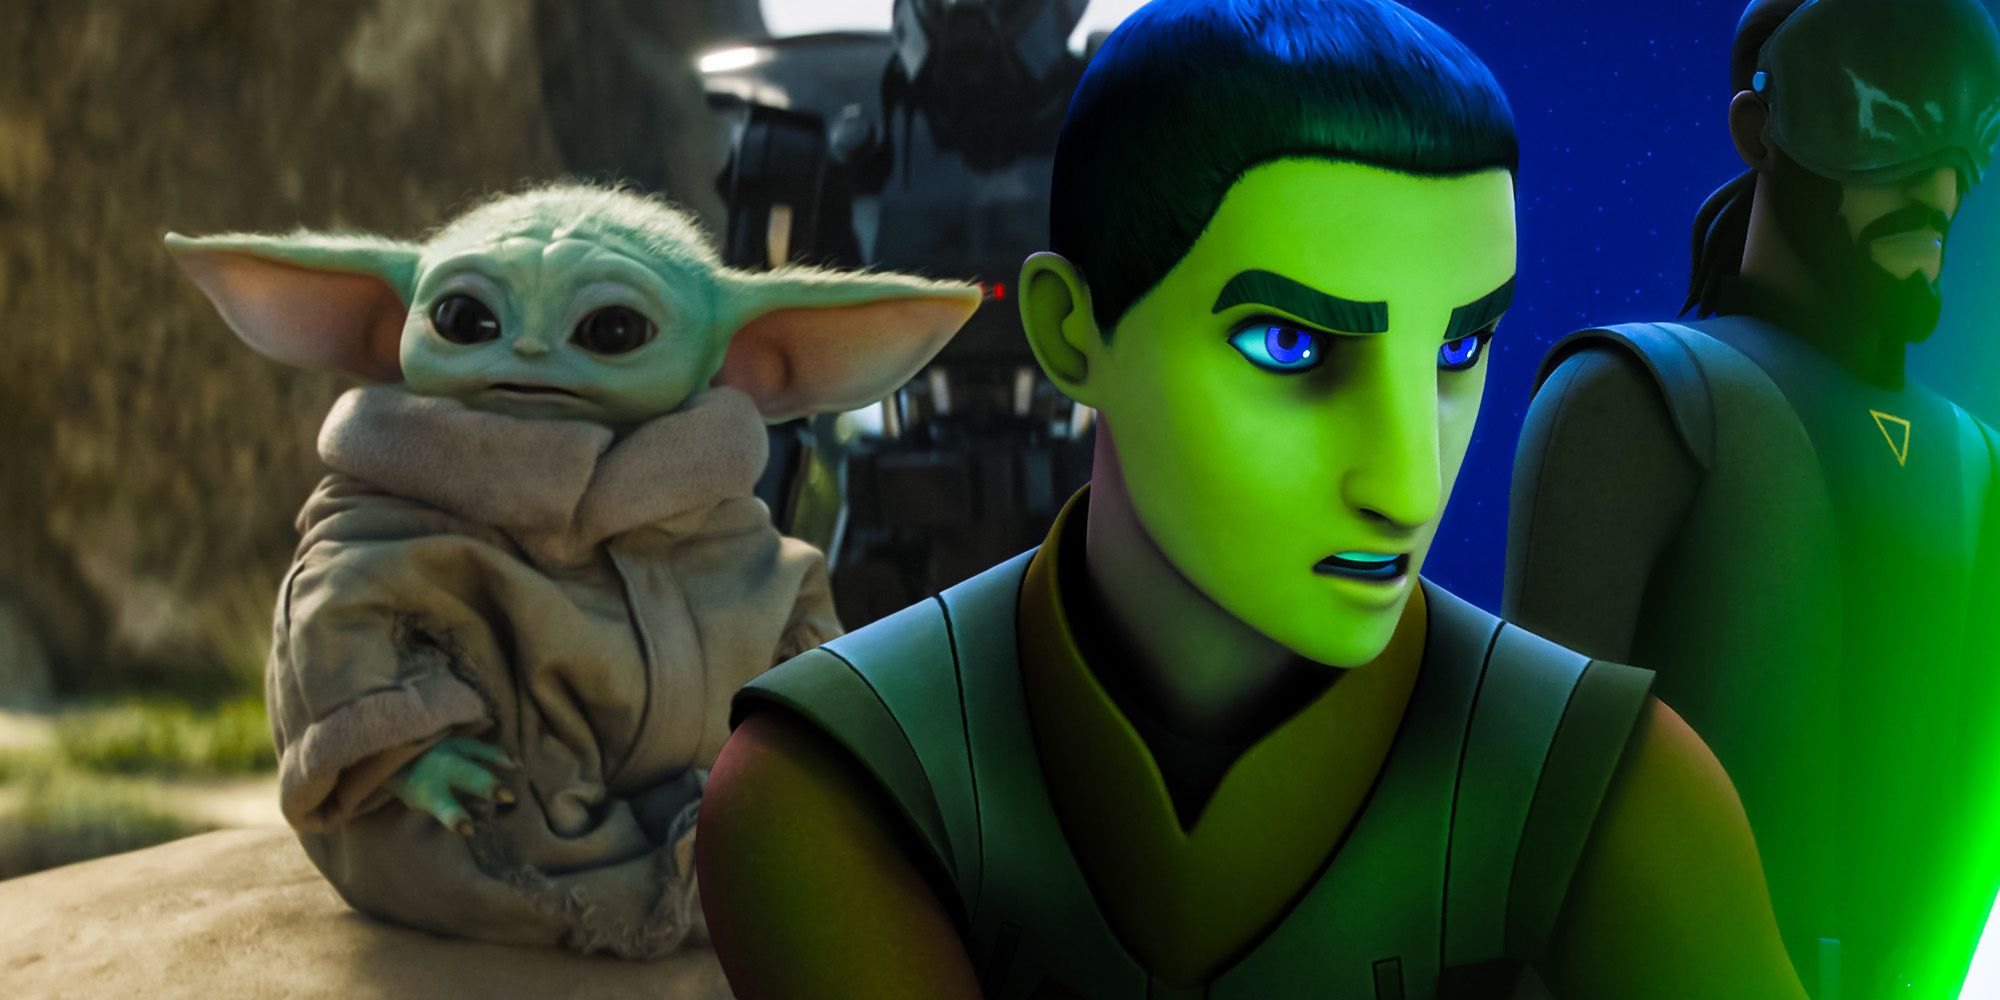 10 Star Wars Theories That Explain What Happens To Grogu After The